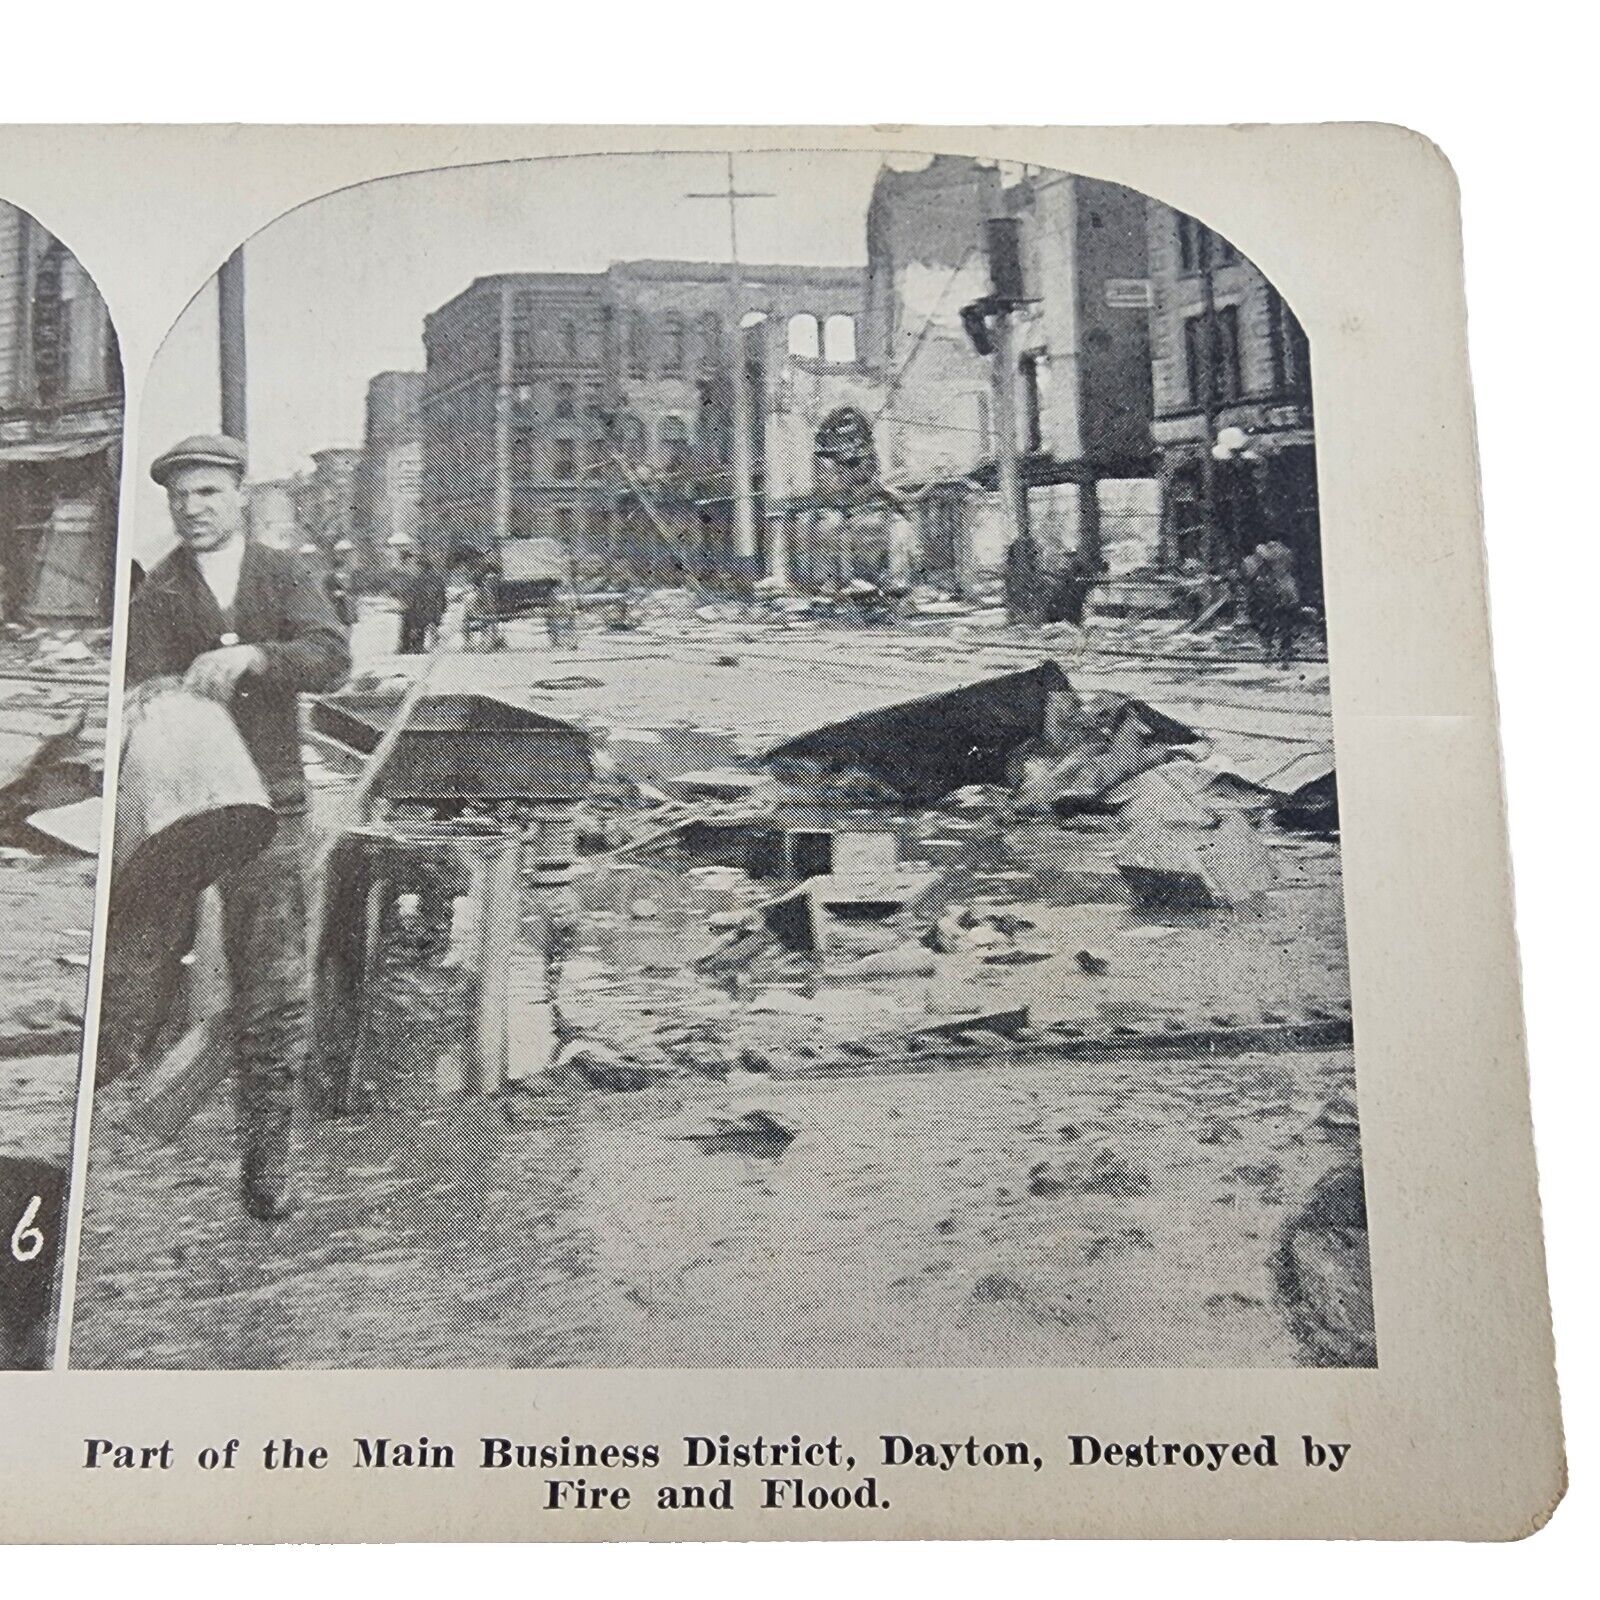 Great Flood of 1913, Dayton Ohio, Business District Destroyed by Fire & Flood